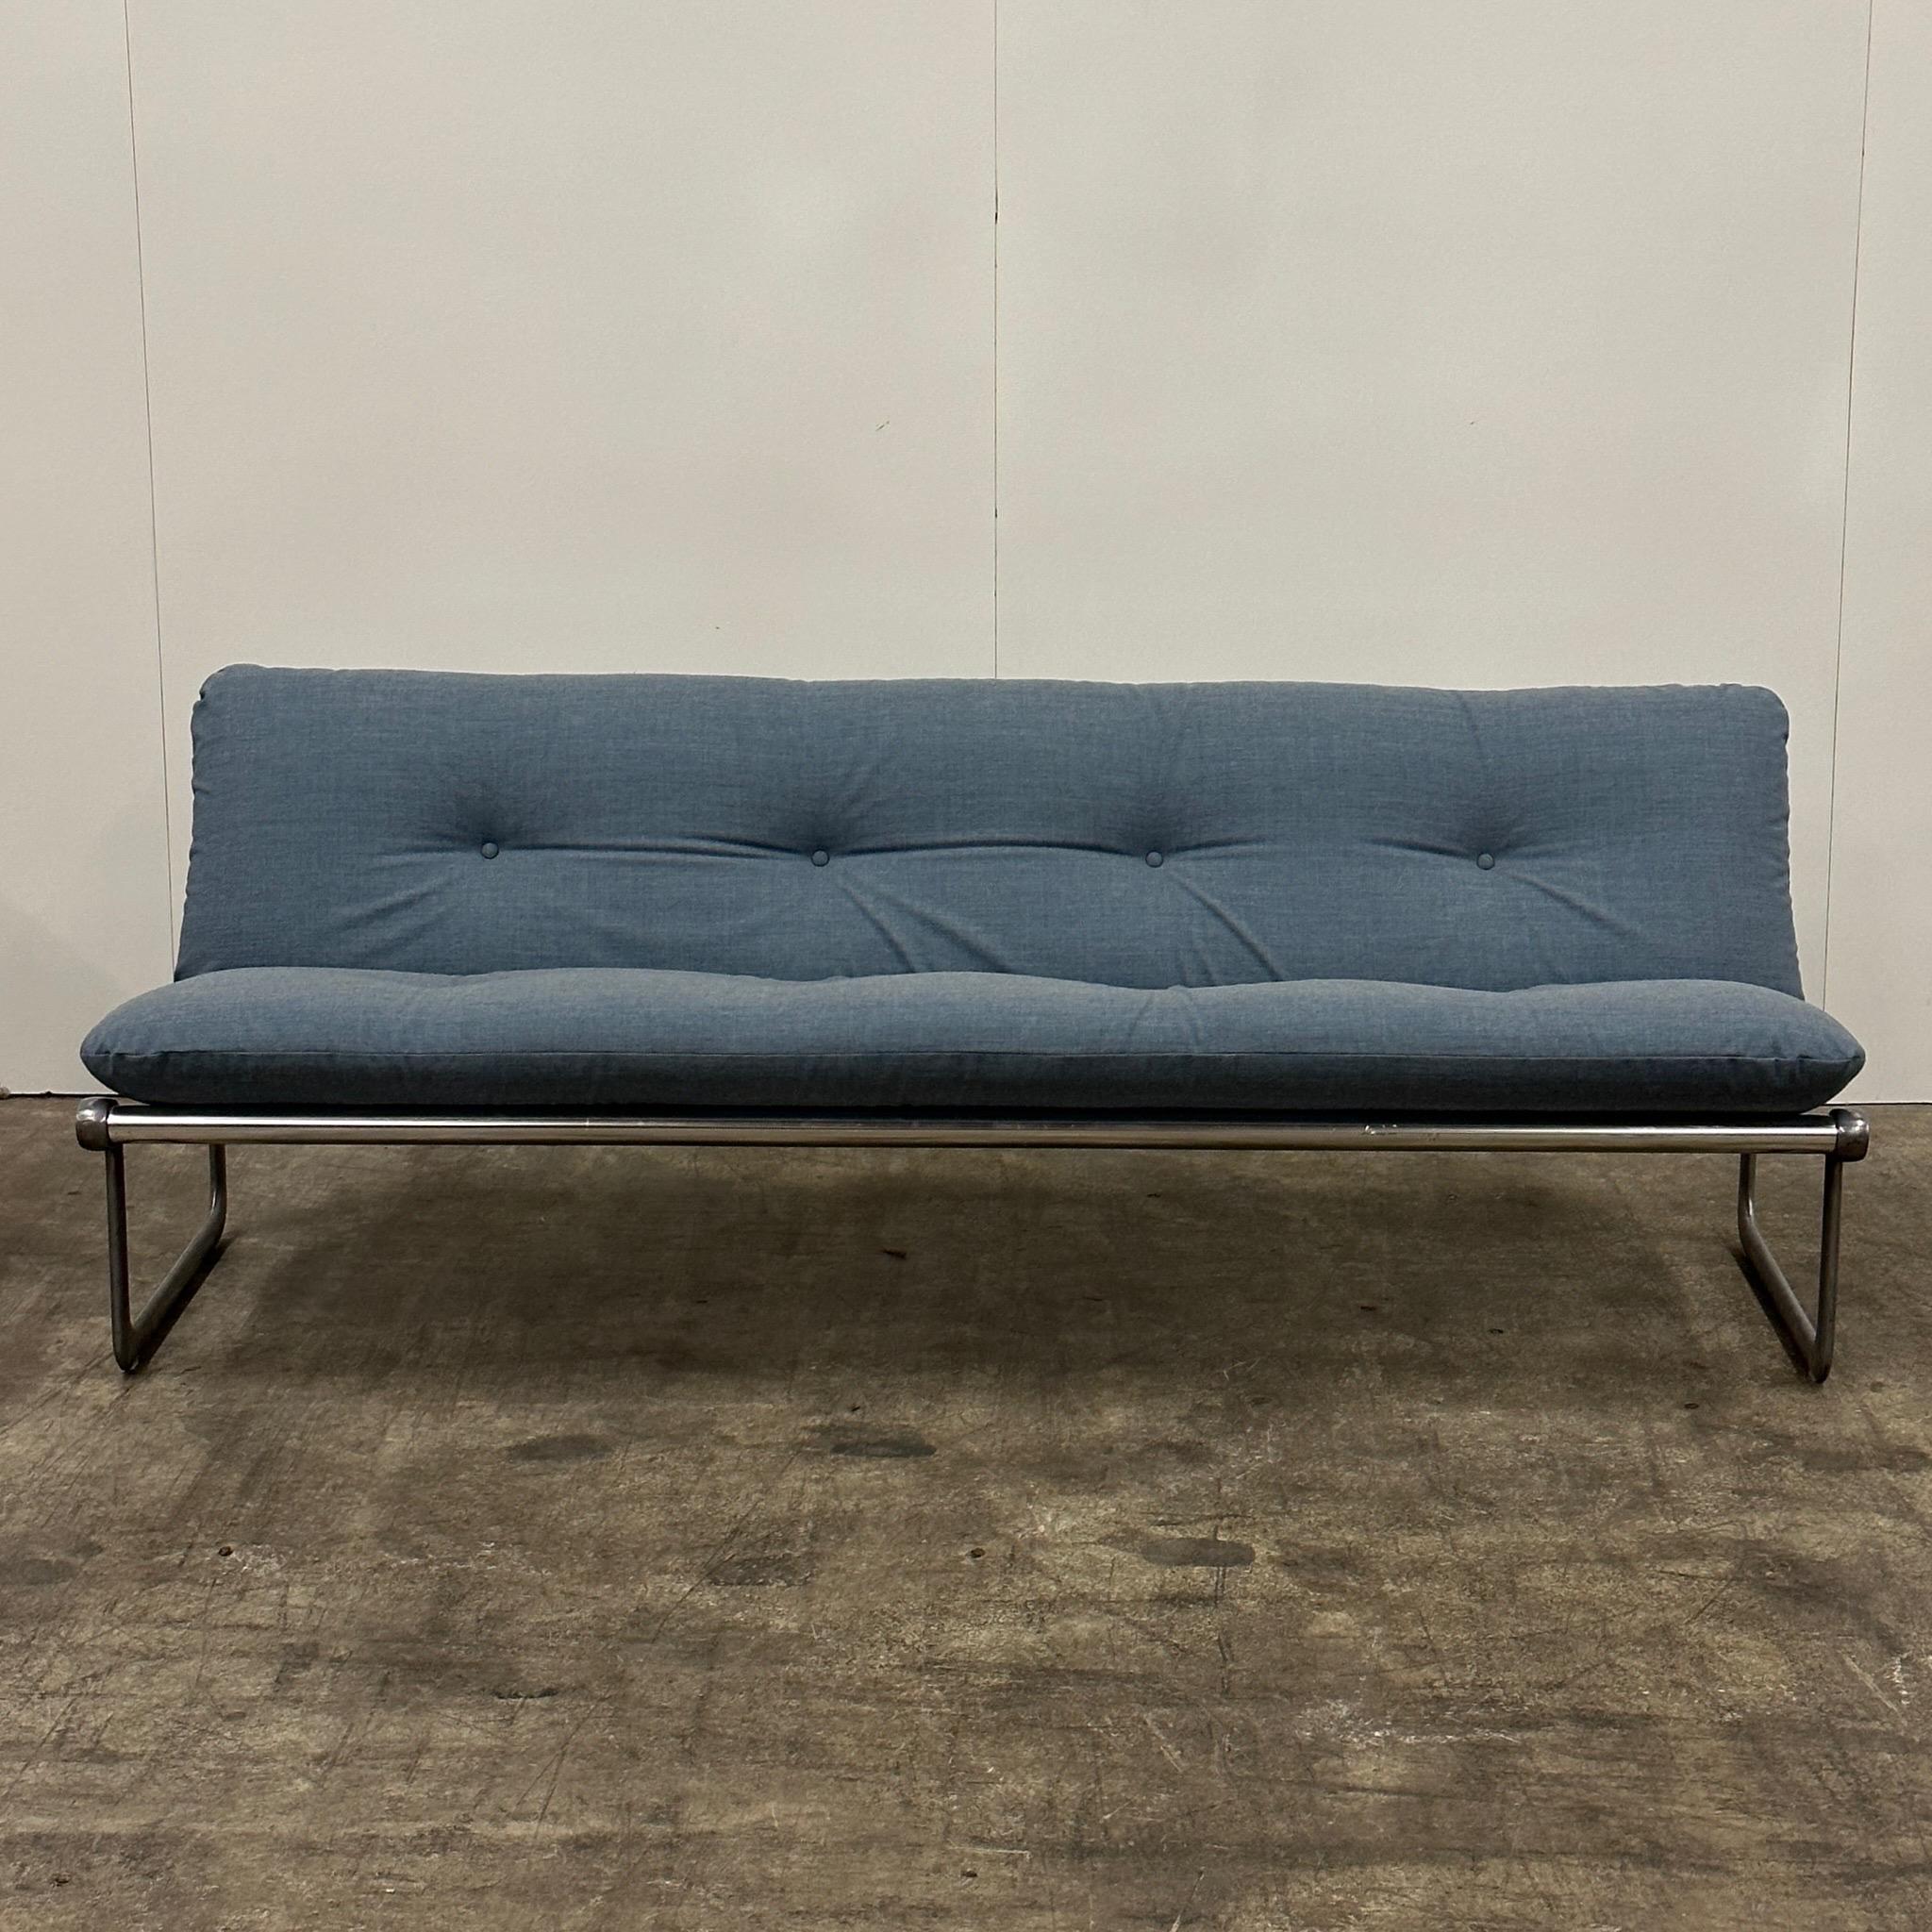 Designed by Hannah and Morrison for Knoll. Cushion was reupholstered in Denim Kvadrat Remix wool fabric. Back sling in original waterproof fabric. 